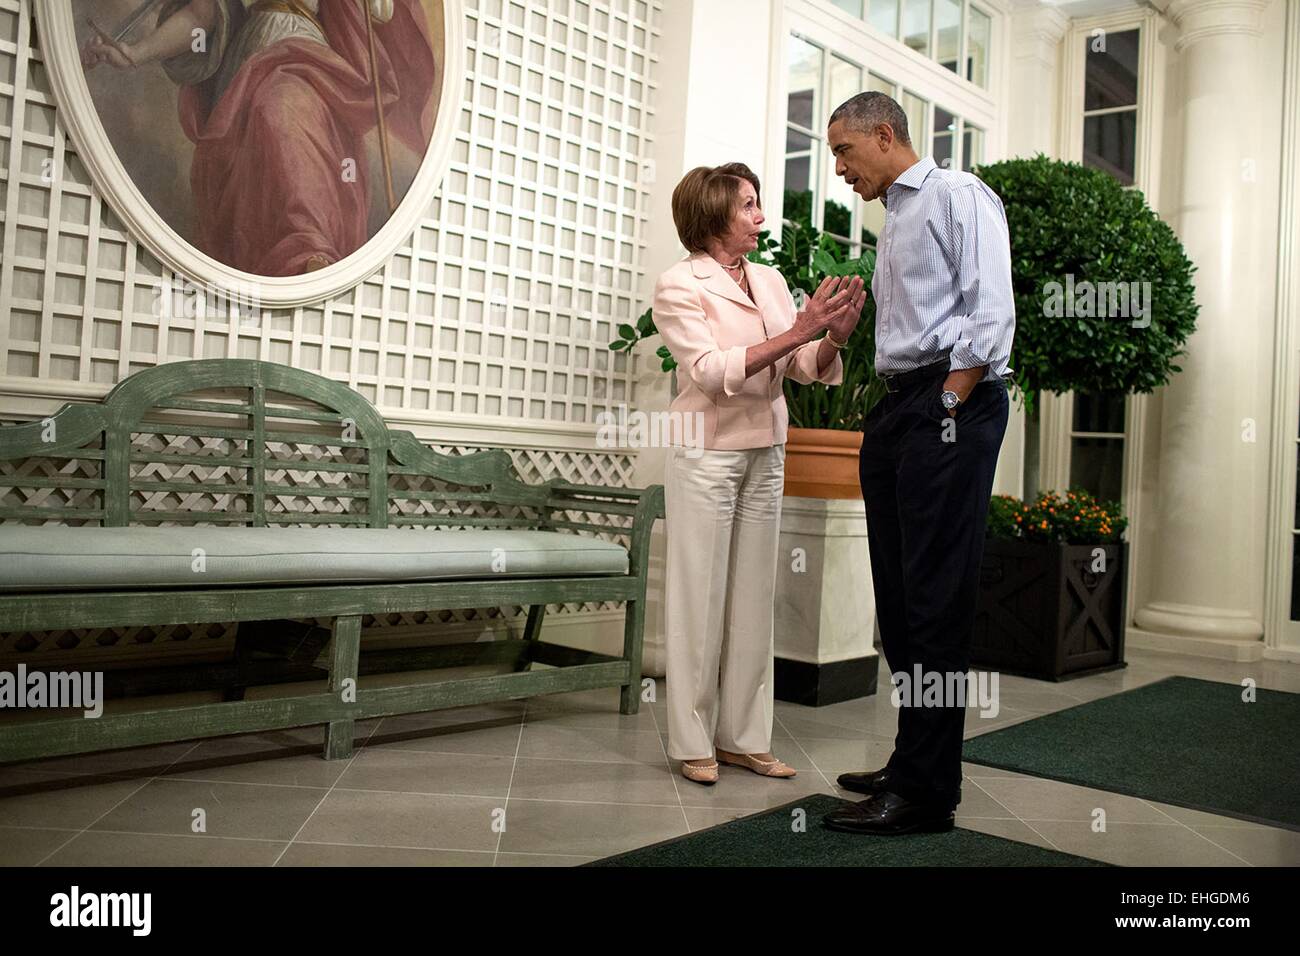 US President Barack Obama speaks with House Minority Leader Nancy Pelosi in the West Garden Room following the Congressional Picnic at the White House September 16, 2014 in Washington, DC. Stock Photo